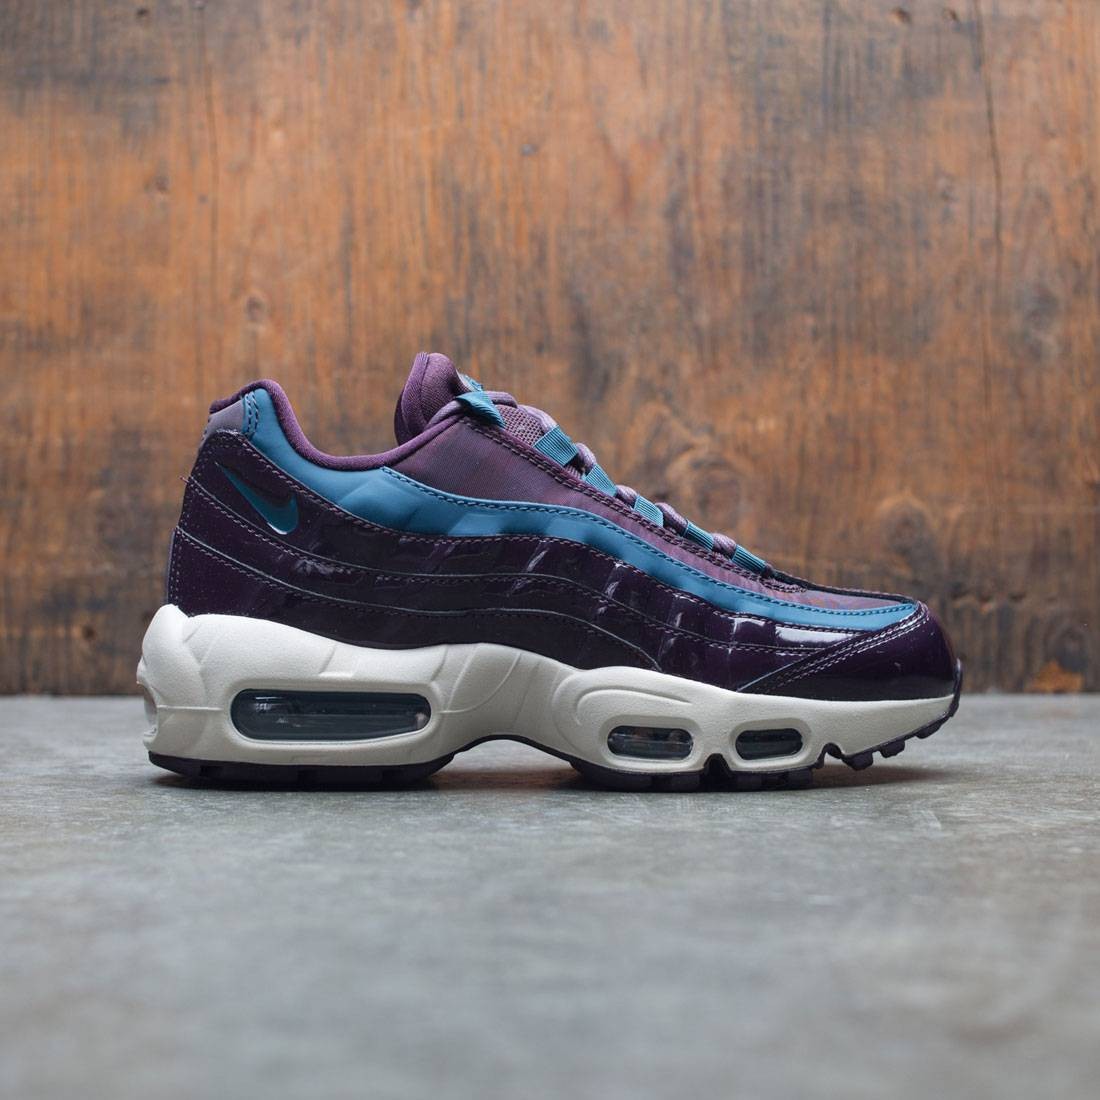 nike air max 95 special edition